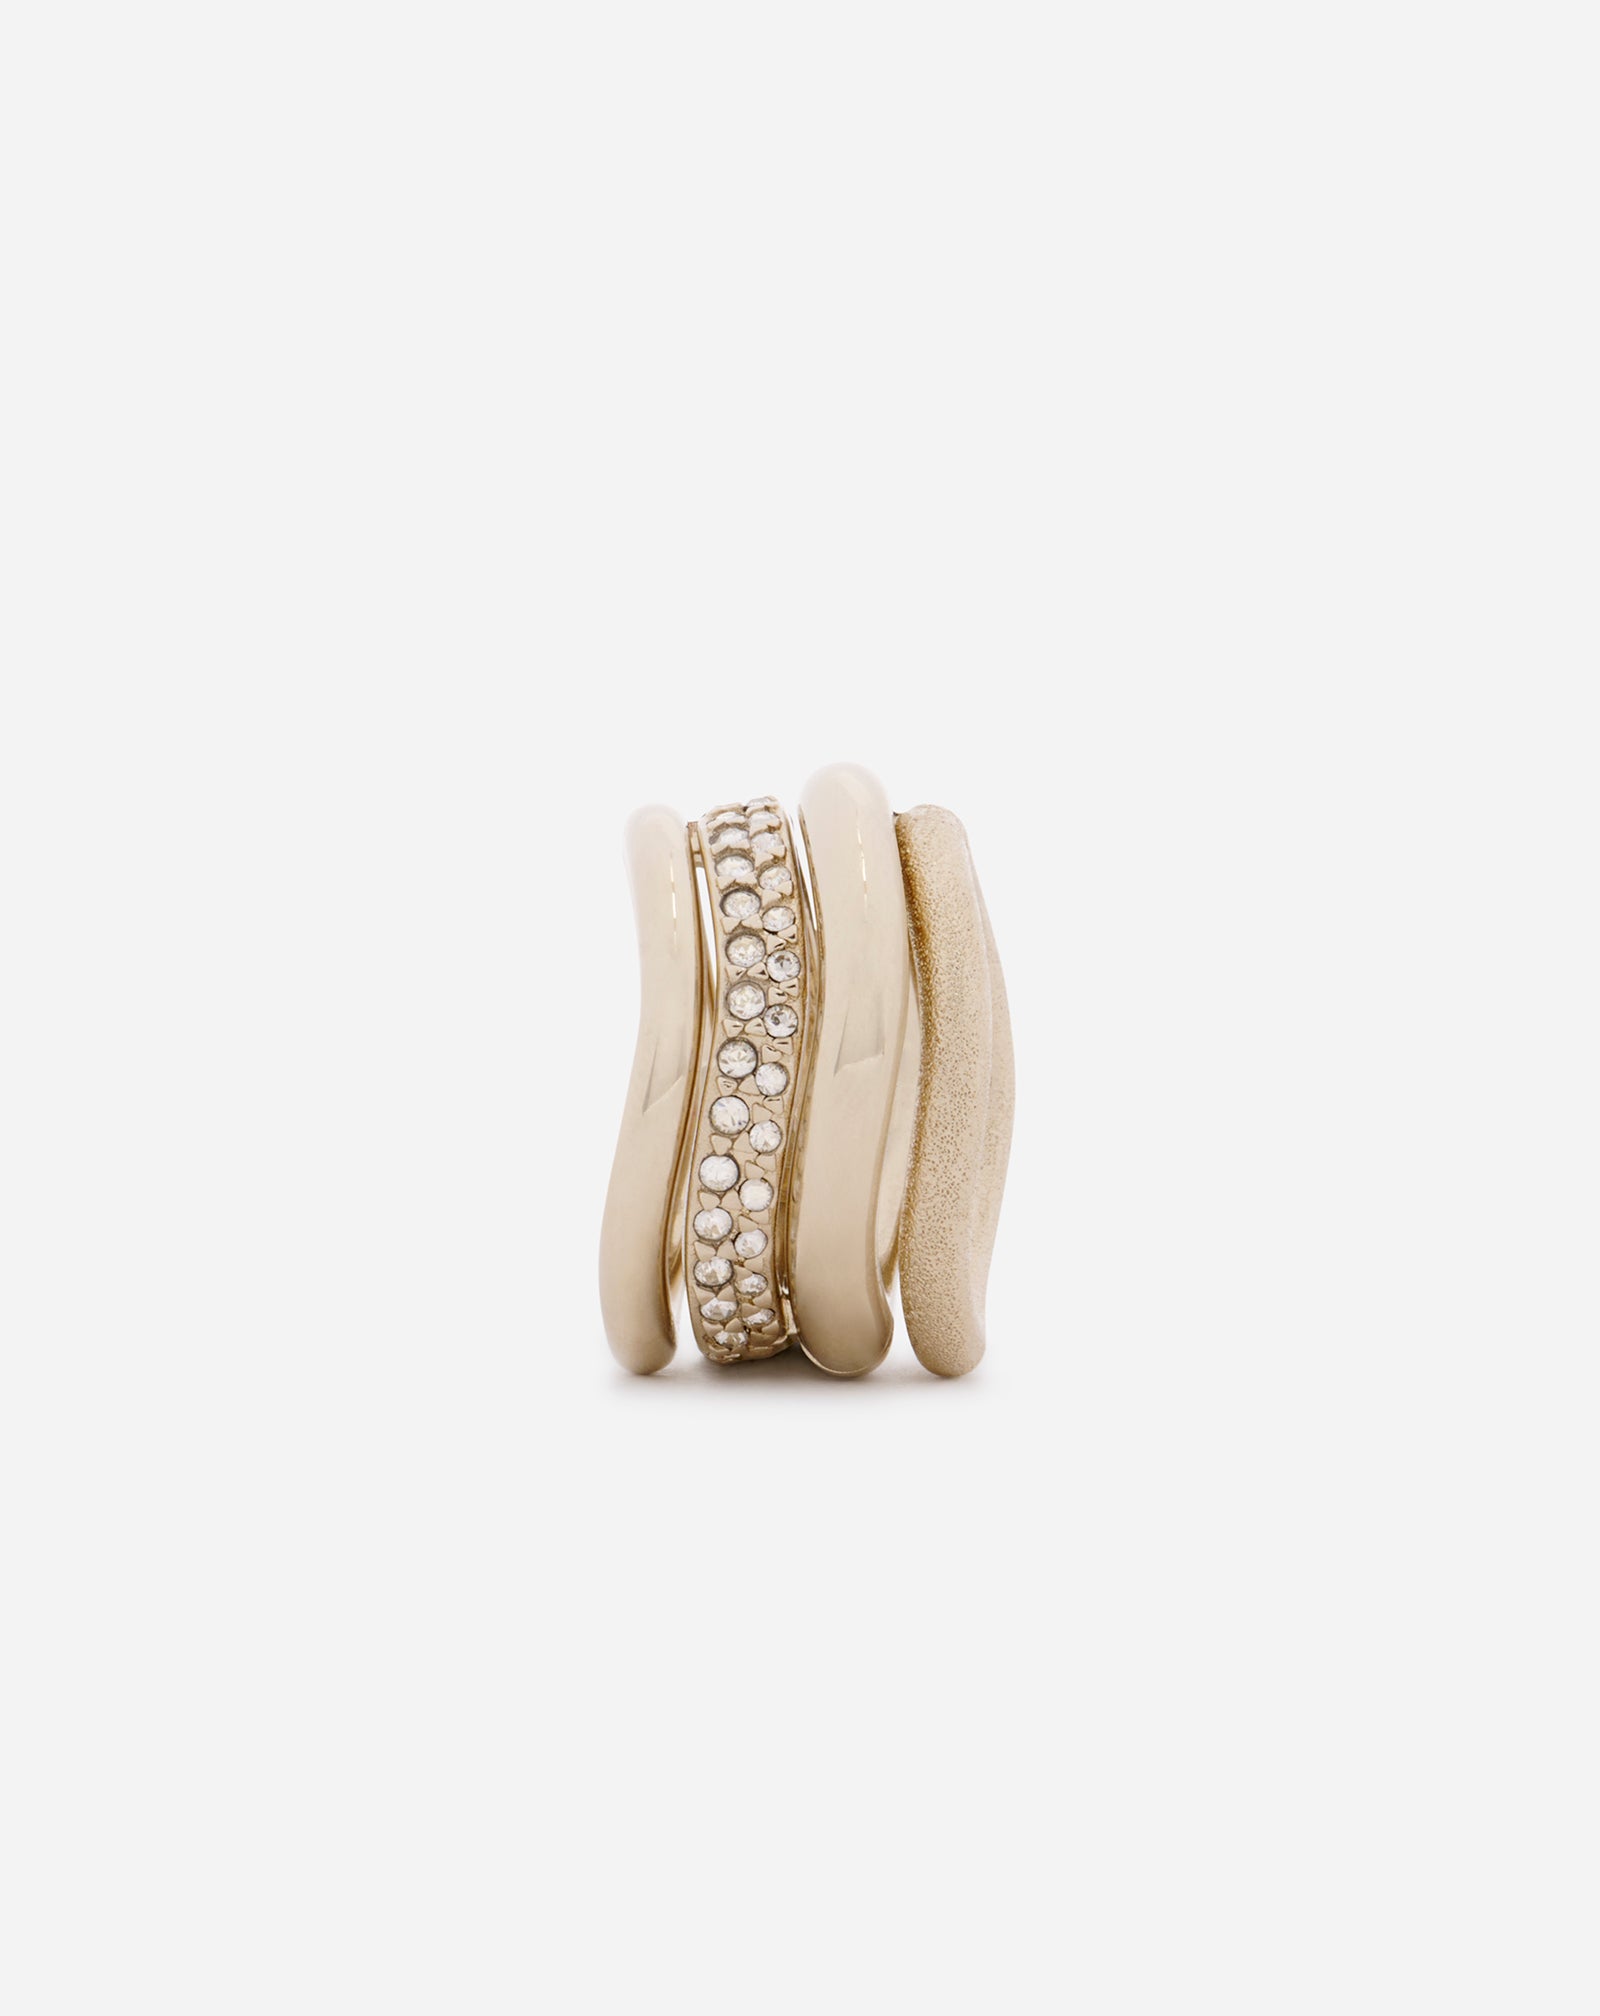 PARTITION BY LANVIN RING